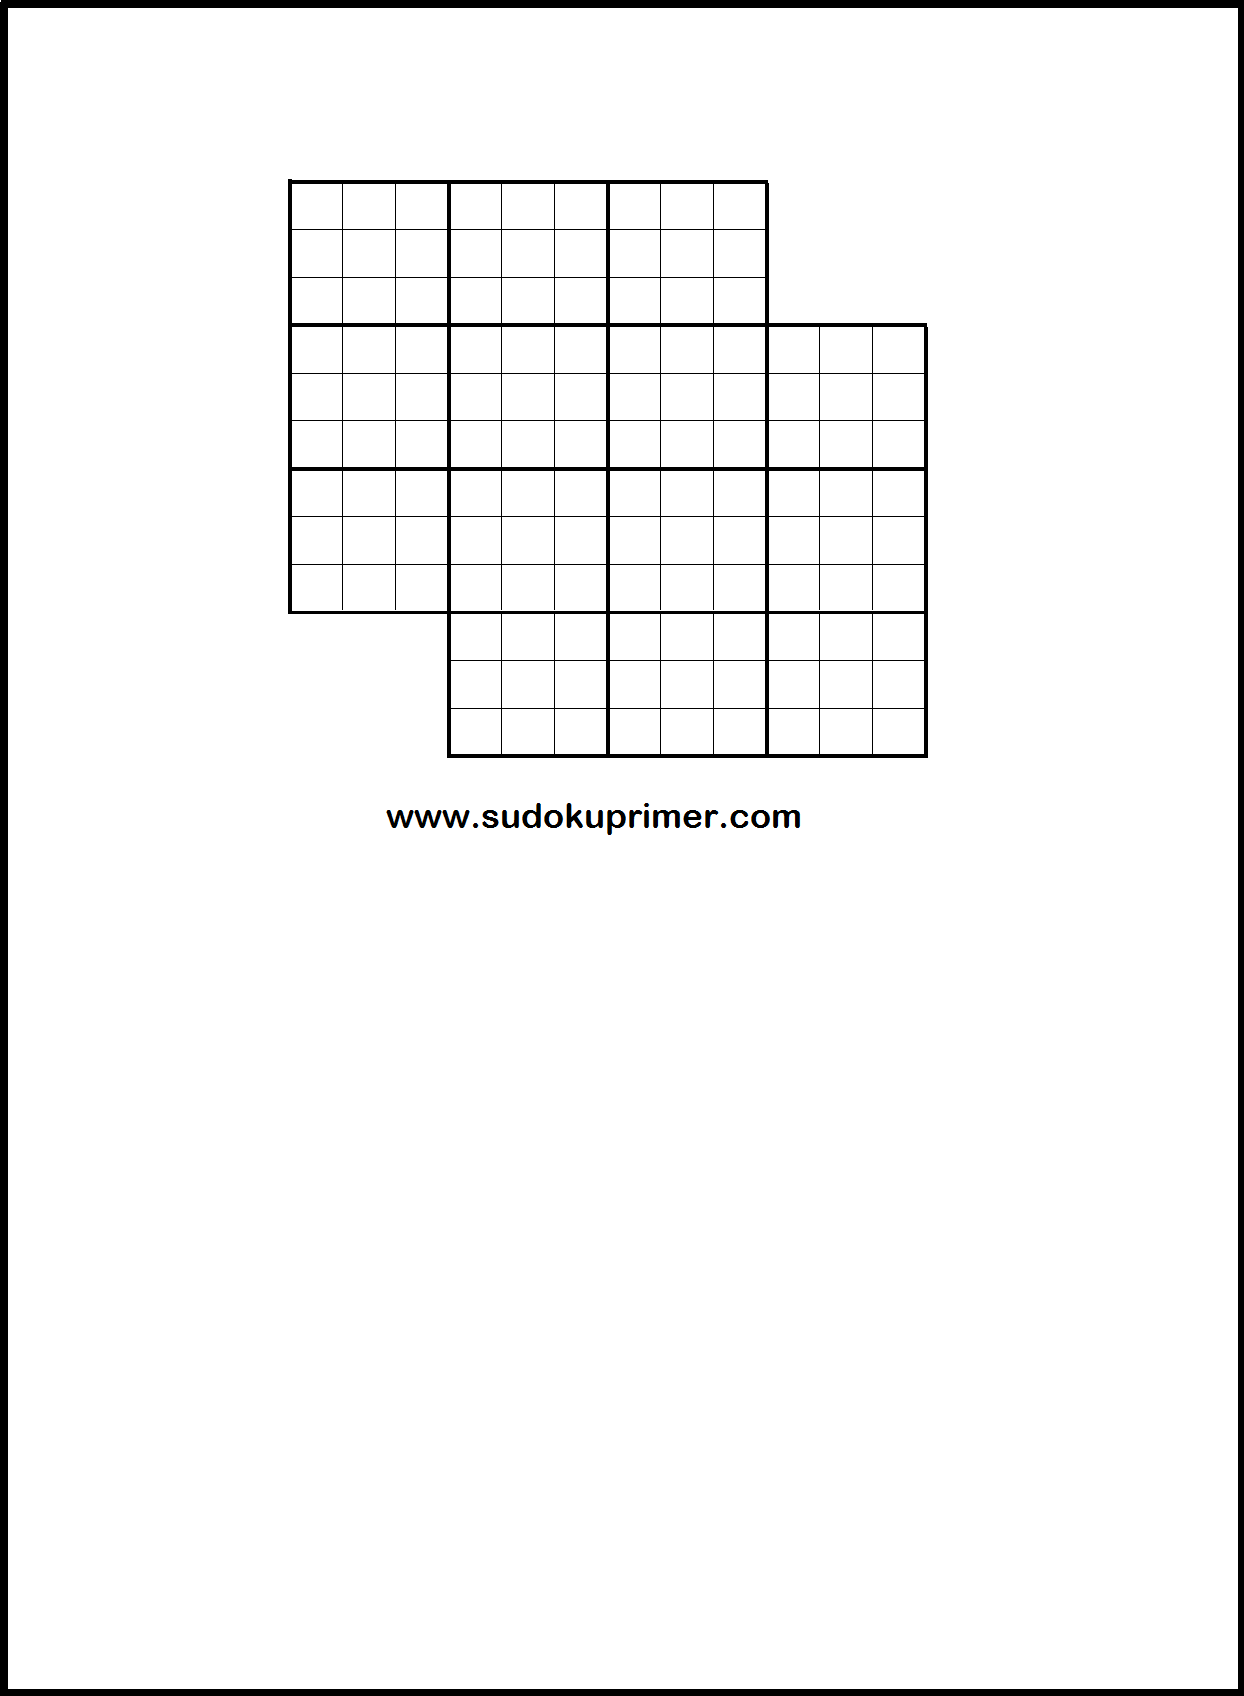 2 x 2 classic overlapping Blank sudoku grid in Excel spreadsheet